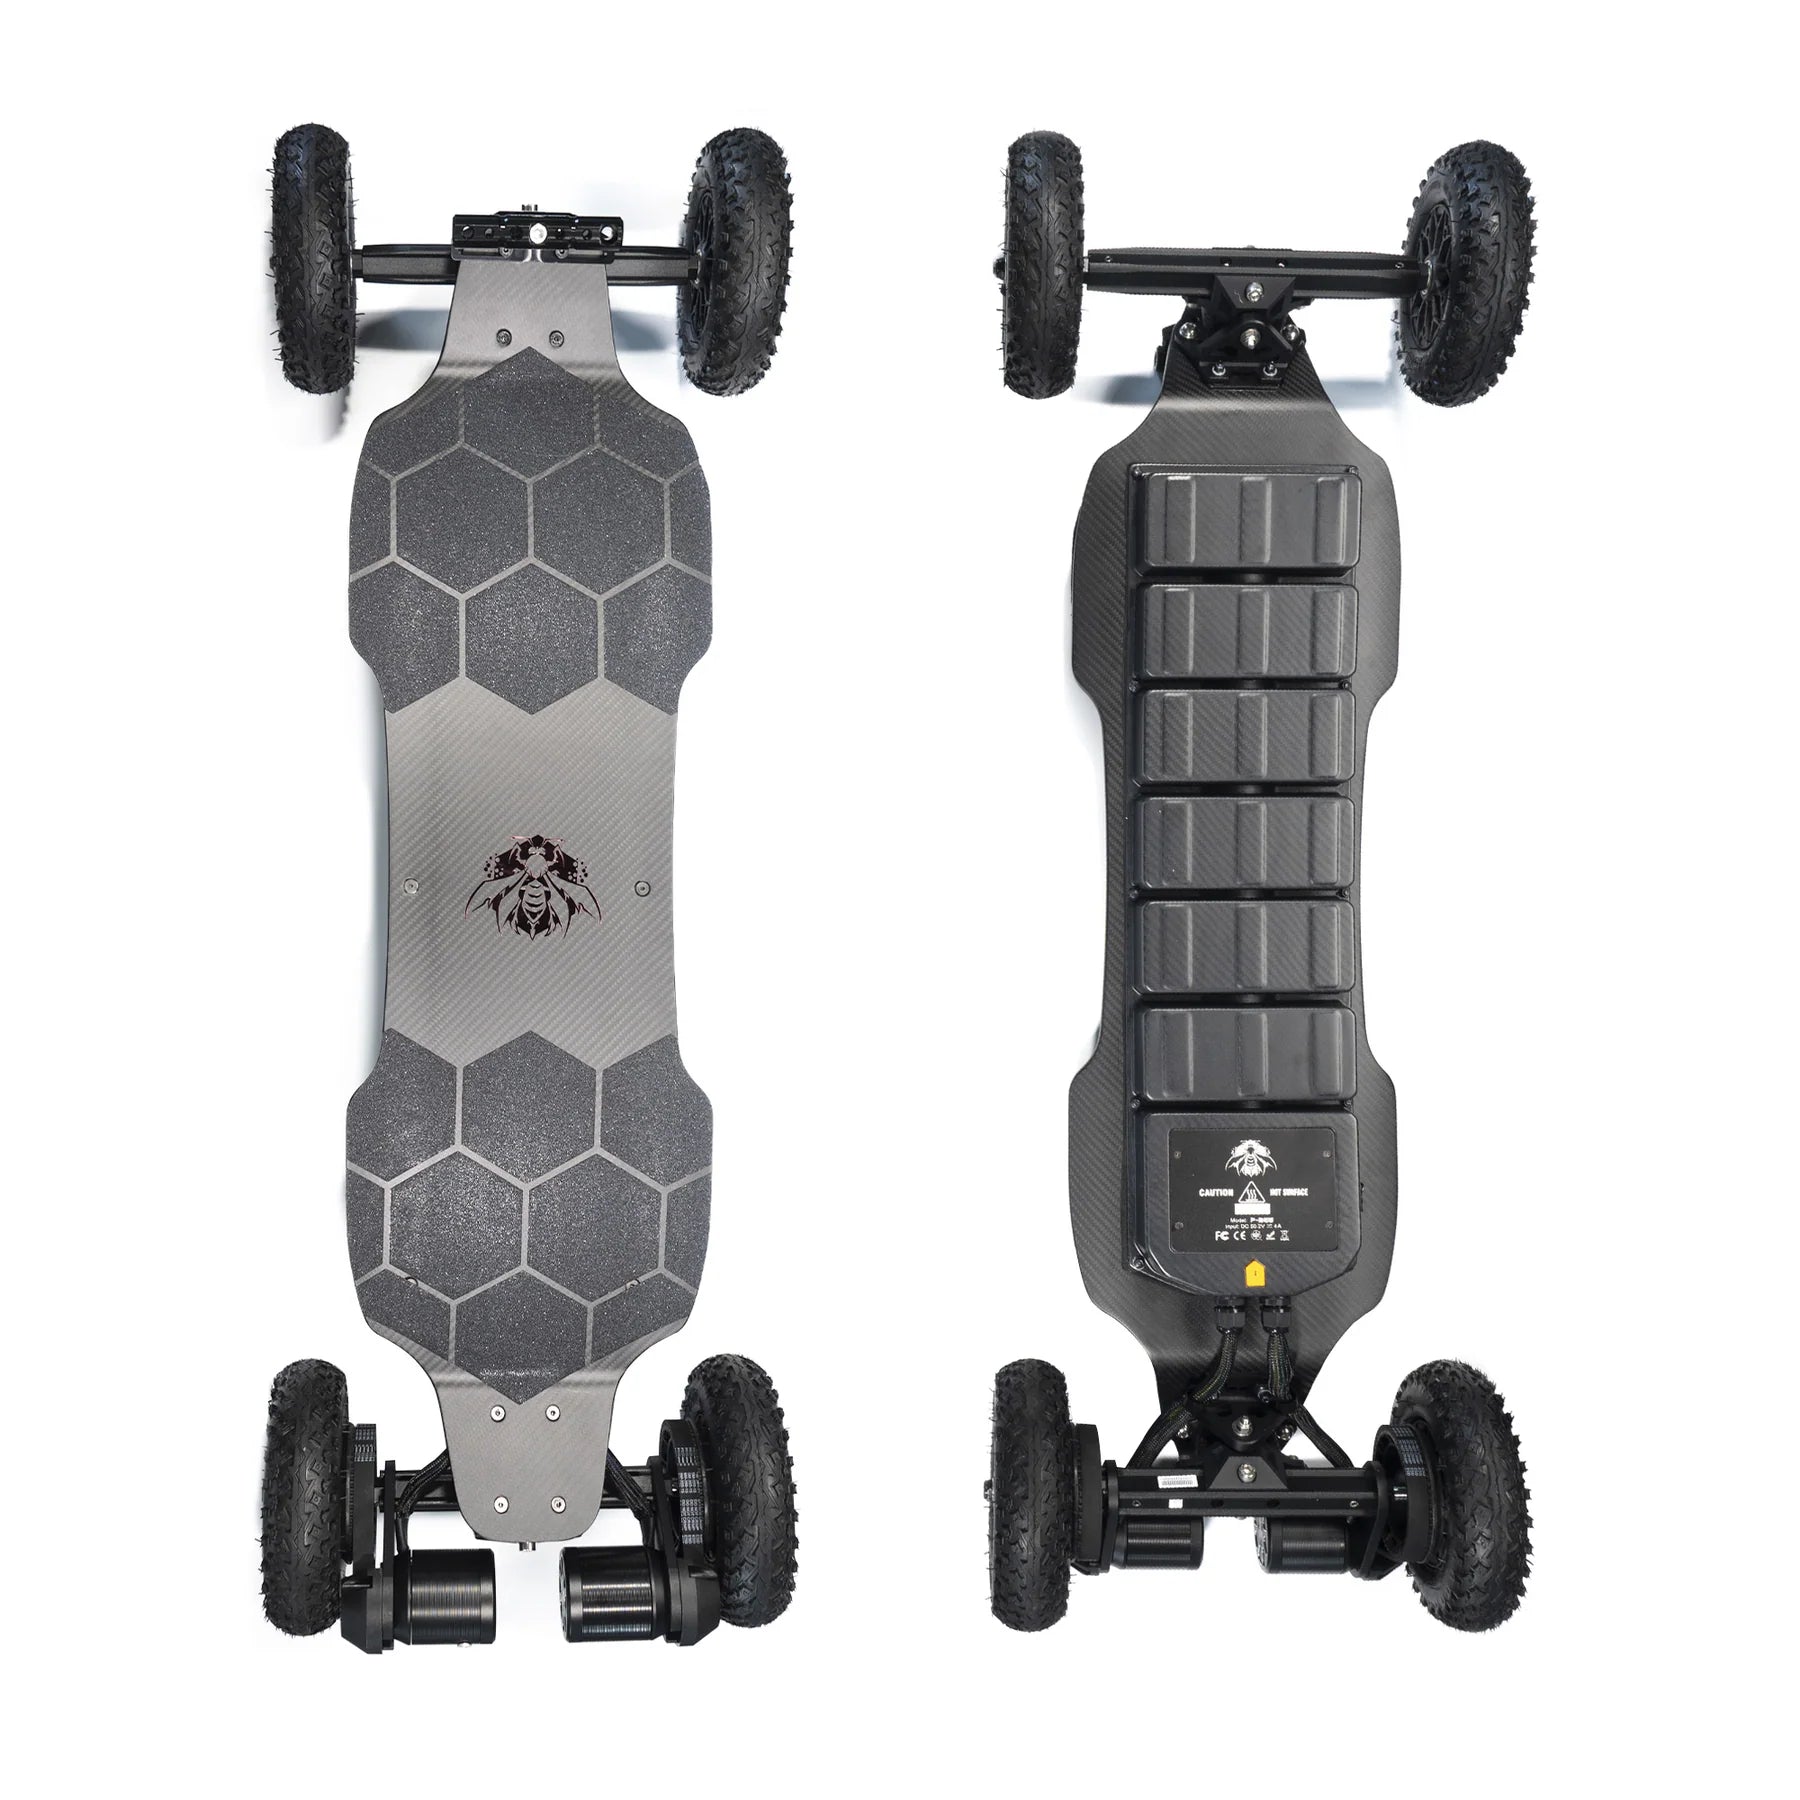  Electric Skateboard Electric Longboard with Remote Control  Electric Skateboard,450W Hub-Motor,18.6 MPH Top Speed,7.6 Miles Range,3  Speeds Adjustment,12 Months Warranty : Sports & Outdoors